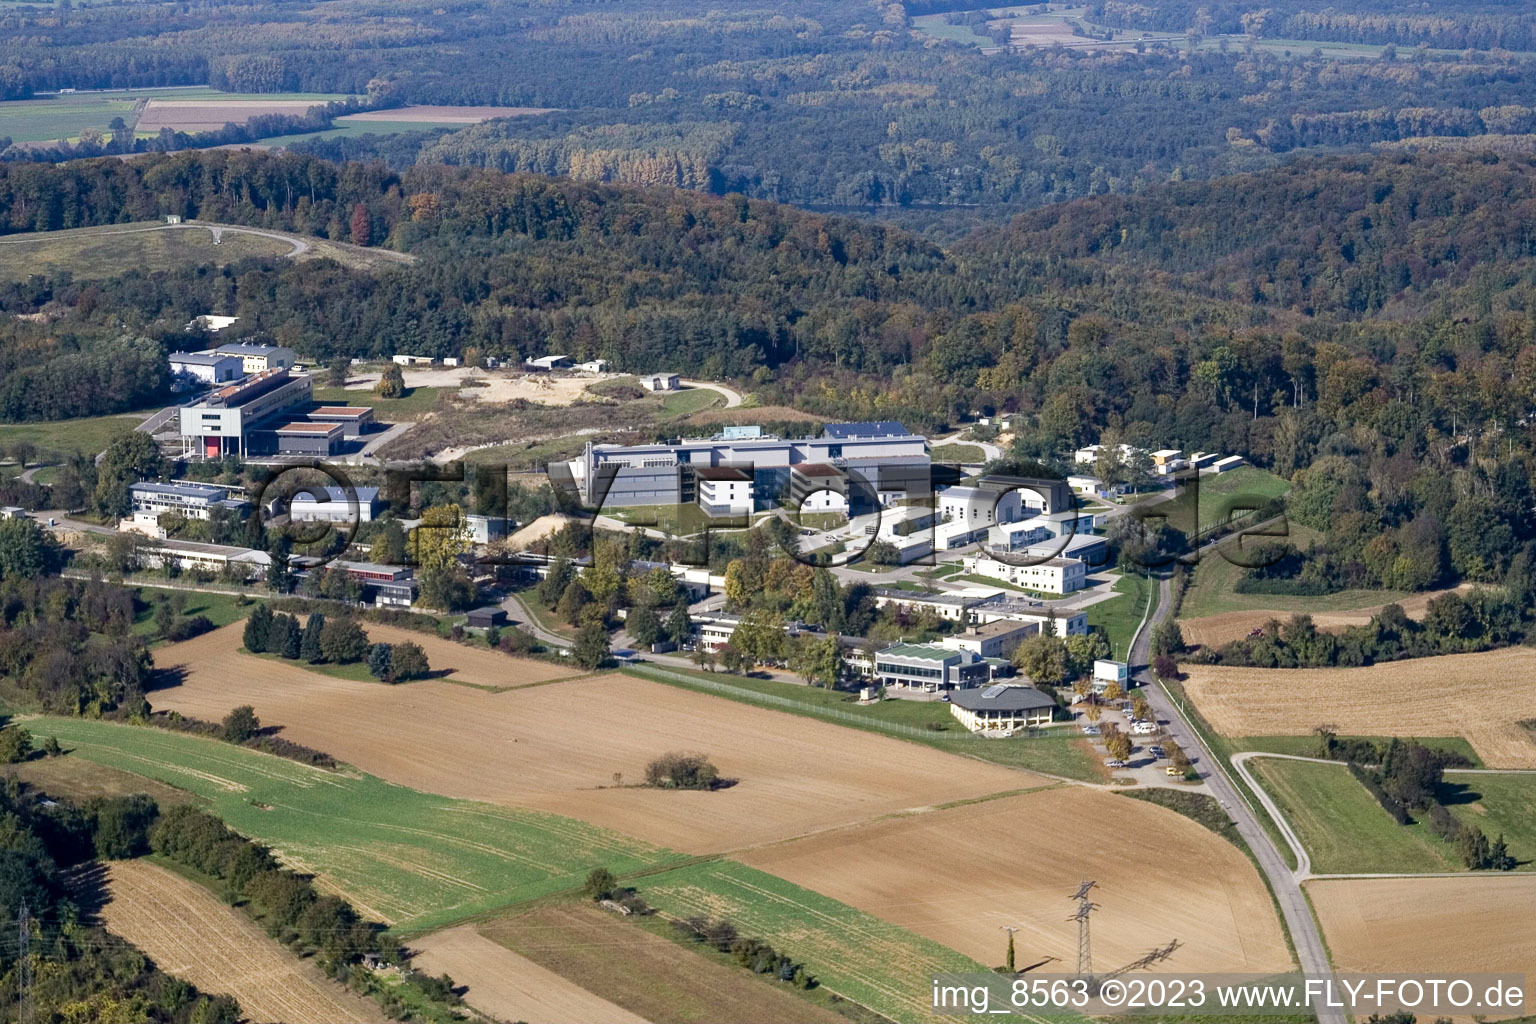 Aerial view of Pfinztal ITG in the district Grötzingen in Karlsruhe in the state Baden-Wuerttemberg, Germany